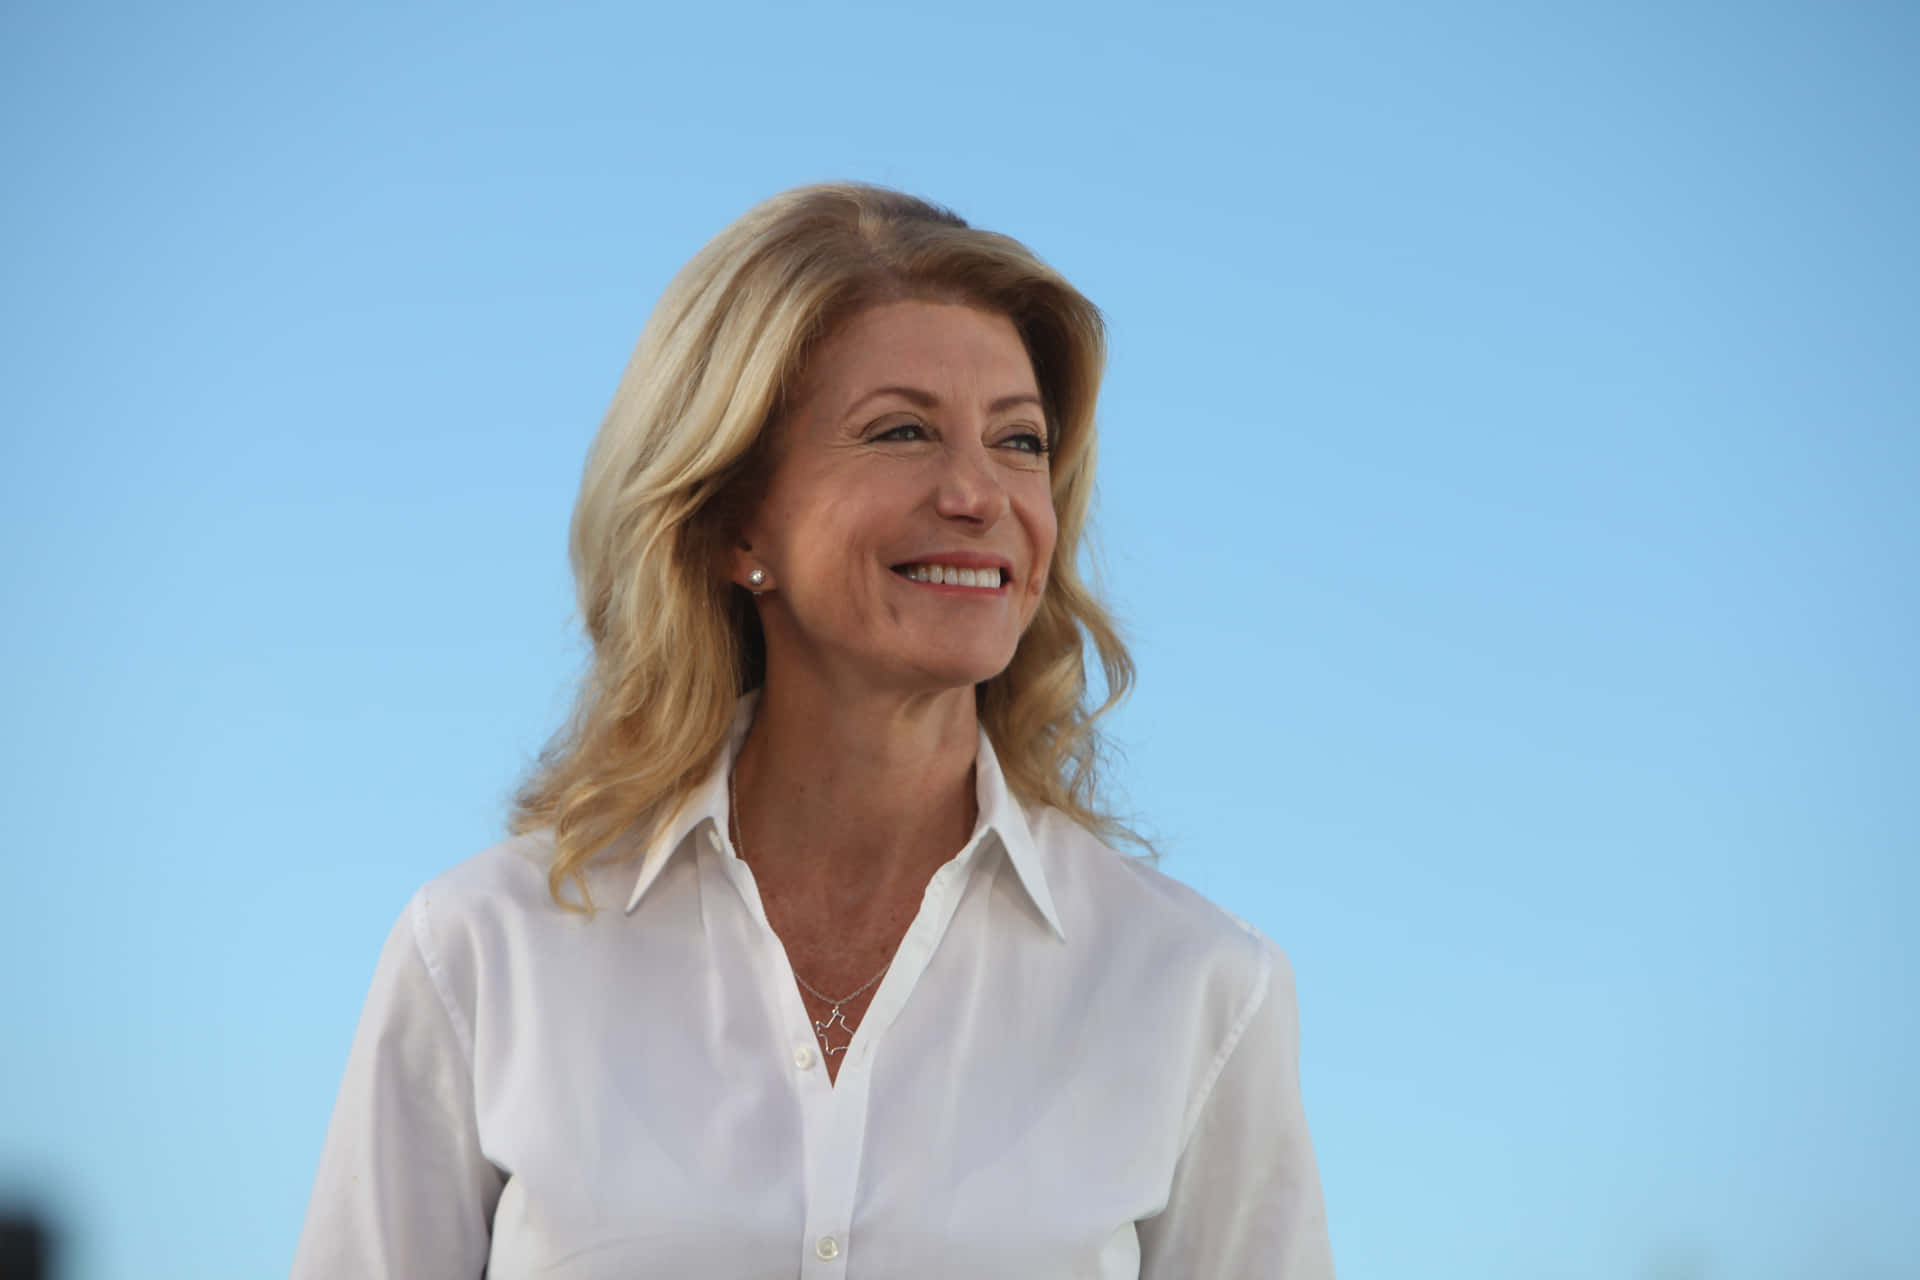 Didyou Mean That You Wanted The Translation In The Context Of A Computer Or Mobile Wallpaper That Features Wendy Davis Wearing A Chic White Blouse? Sfondo